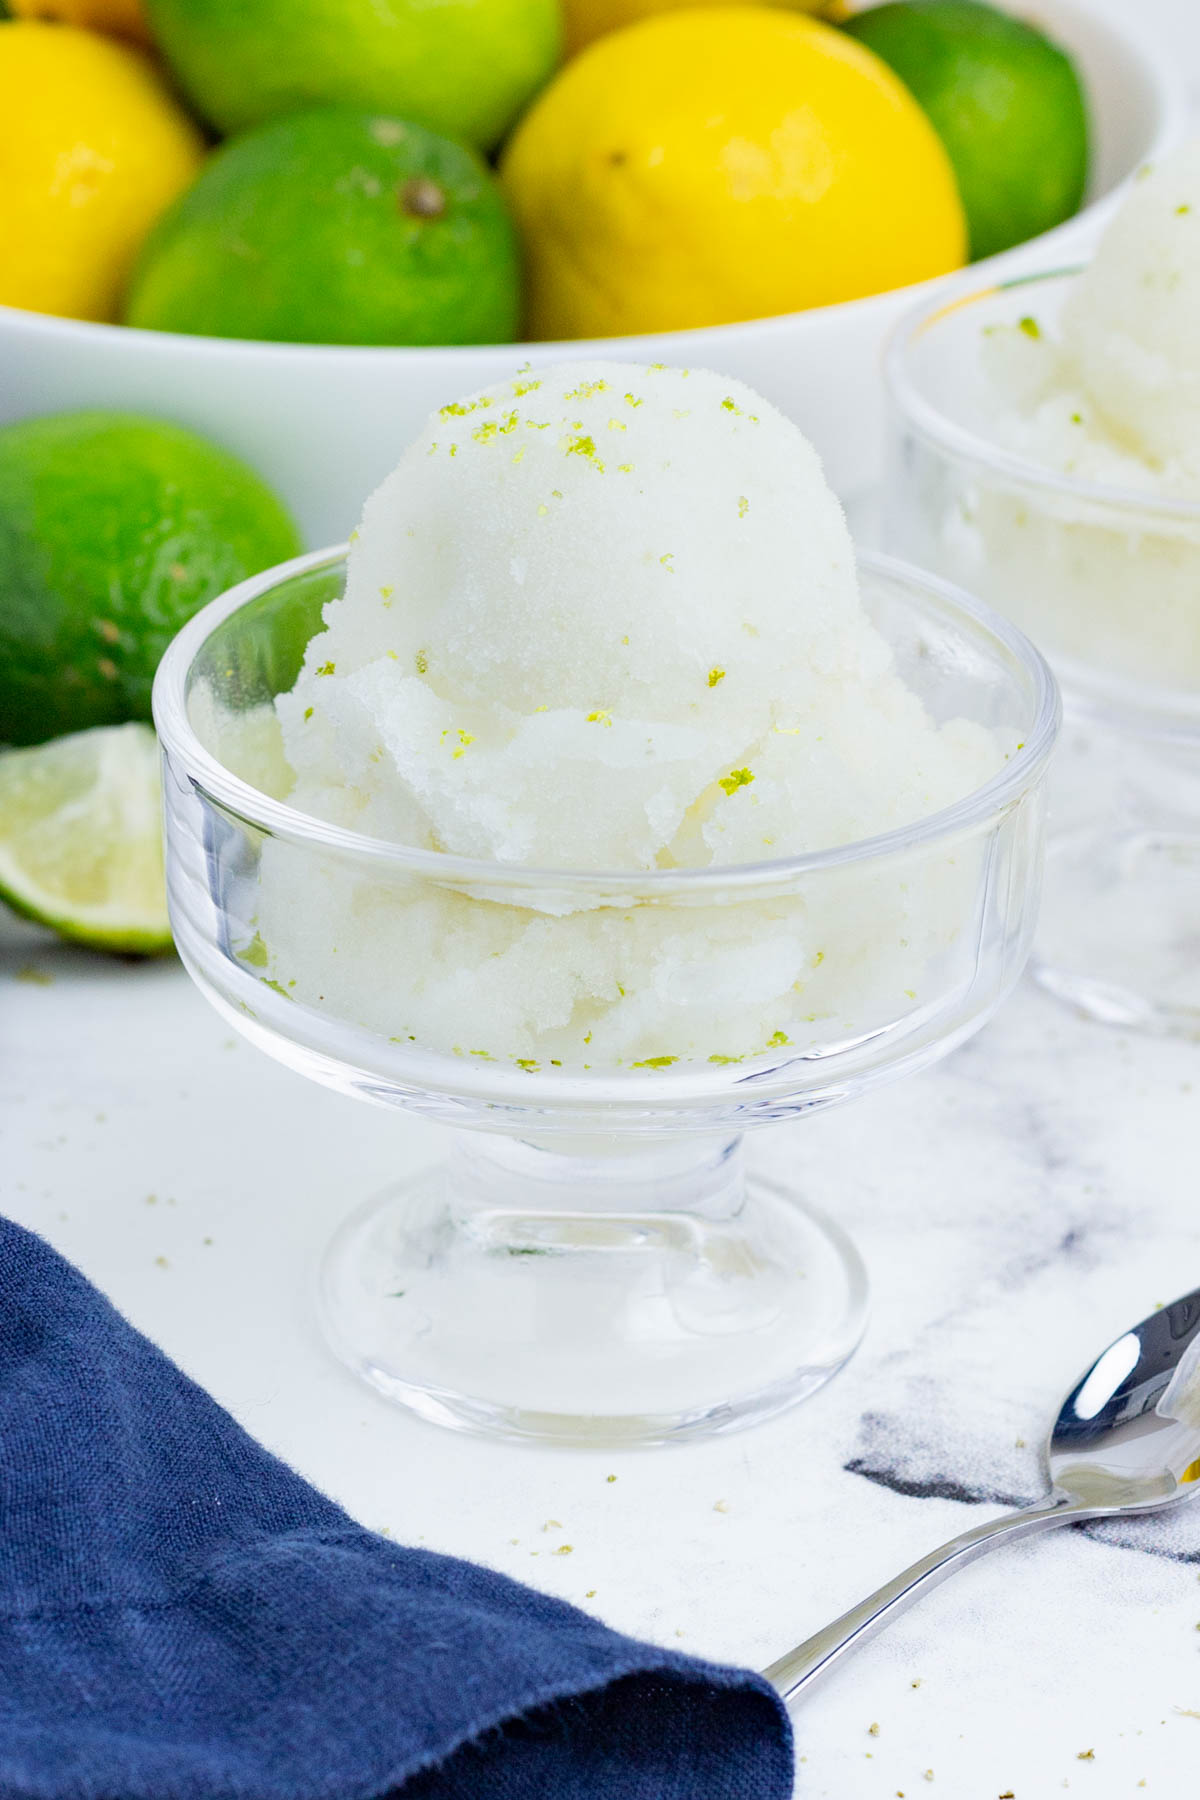 Lime sorbet is simple to make with lime juice and zest along with simple syrup.